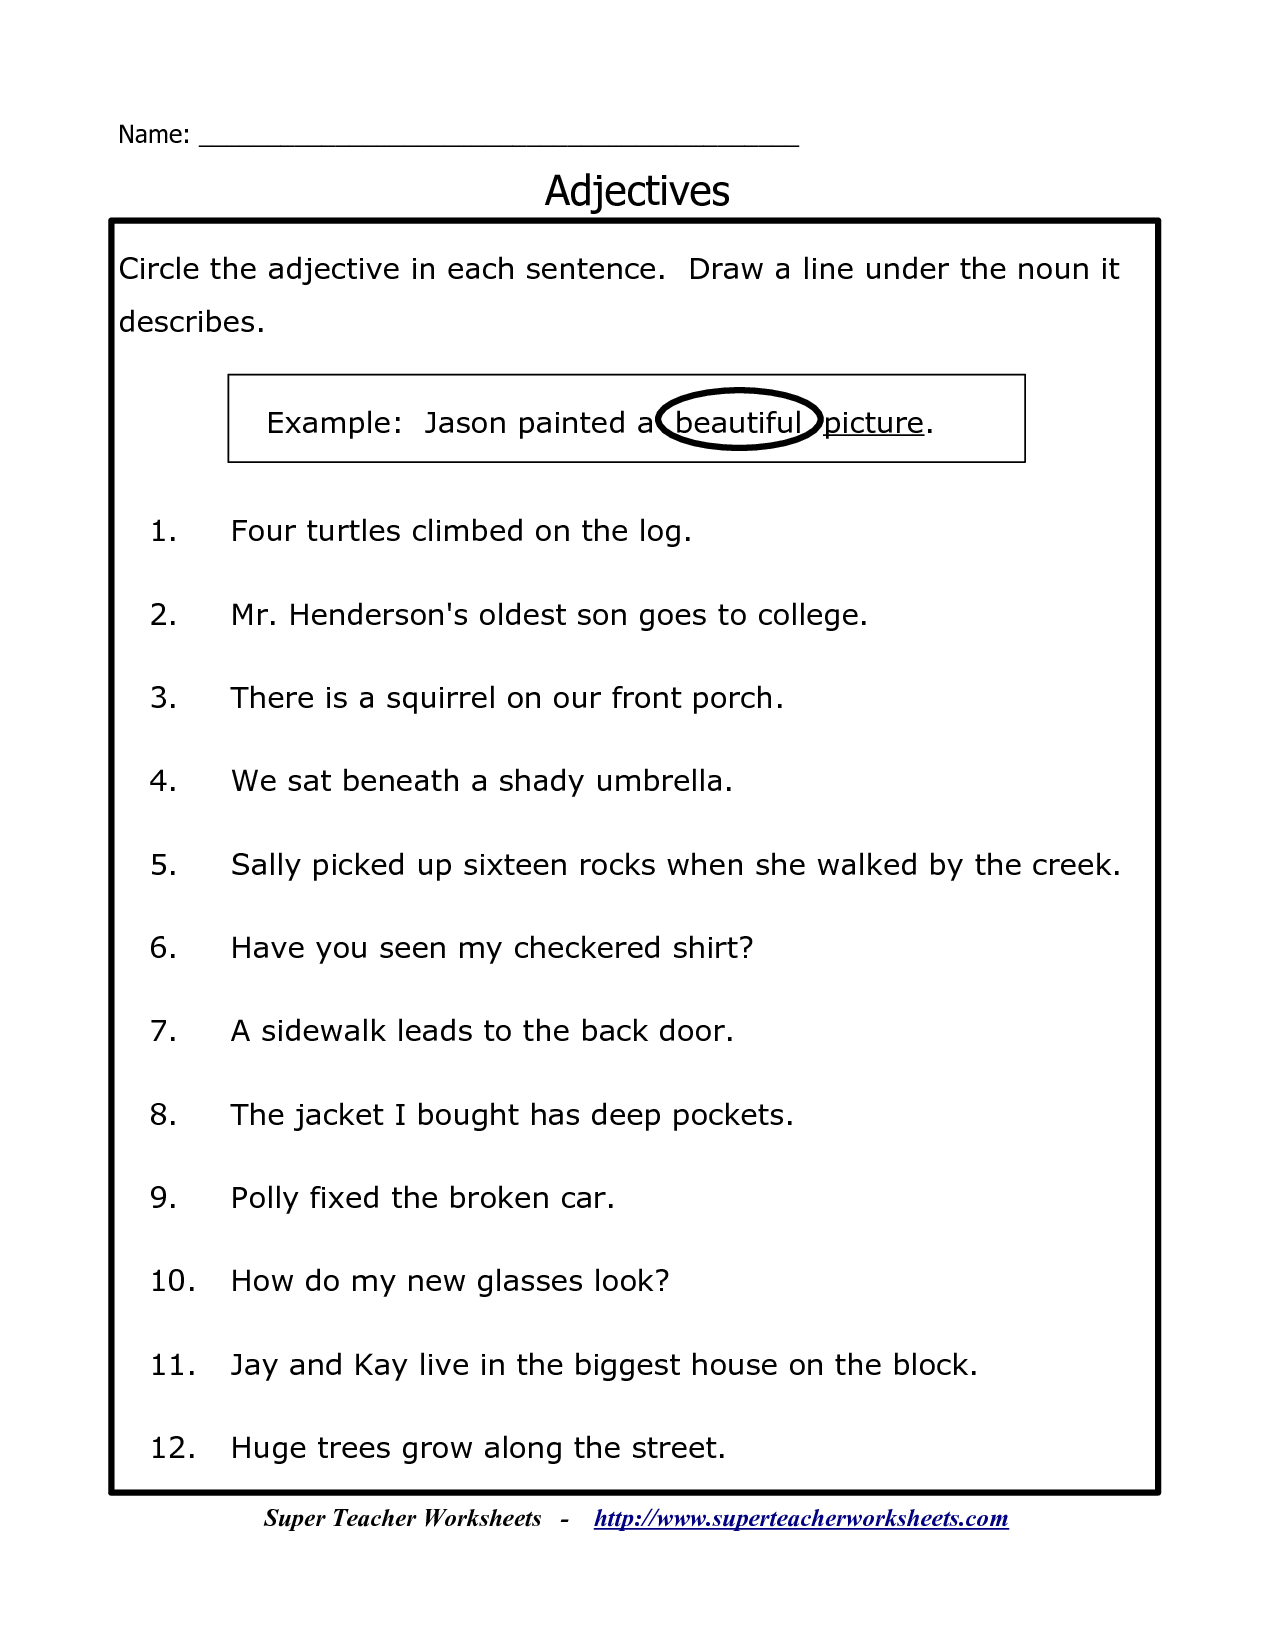 adverb-study-worksheet-common-core-teaching-resource